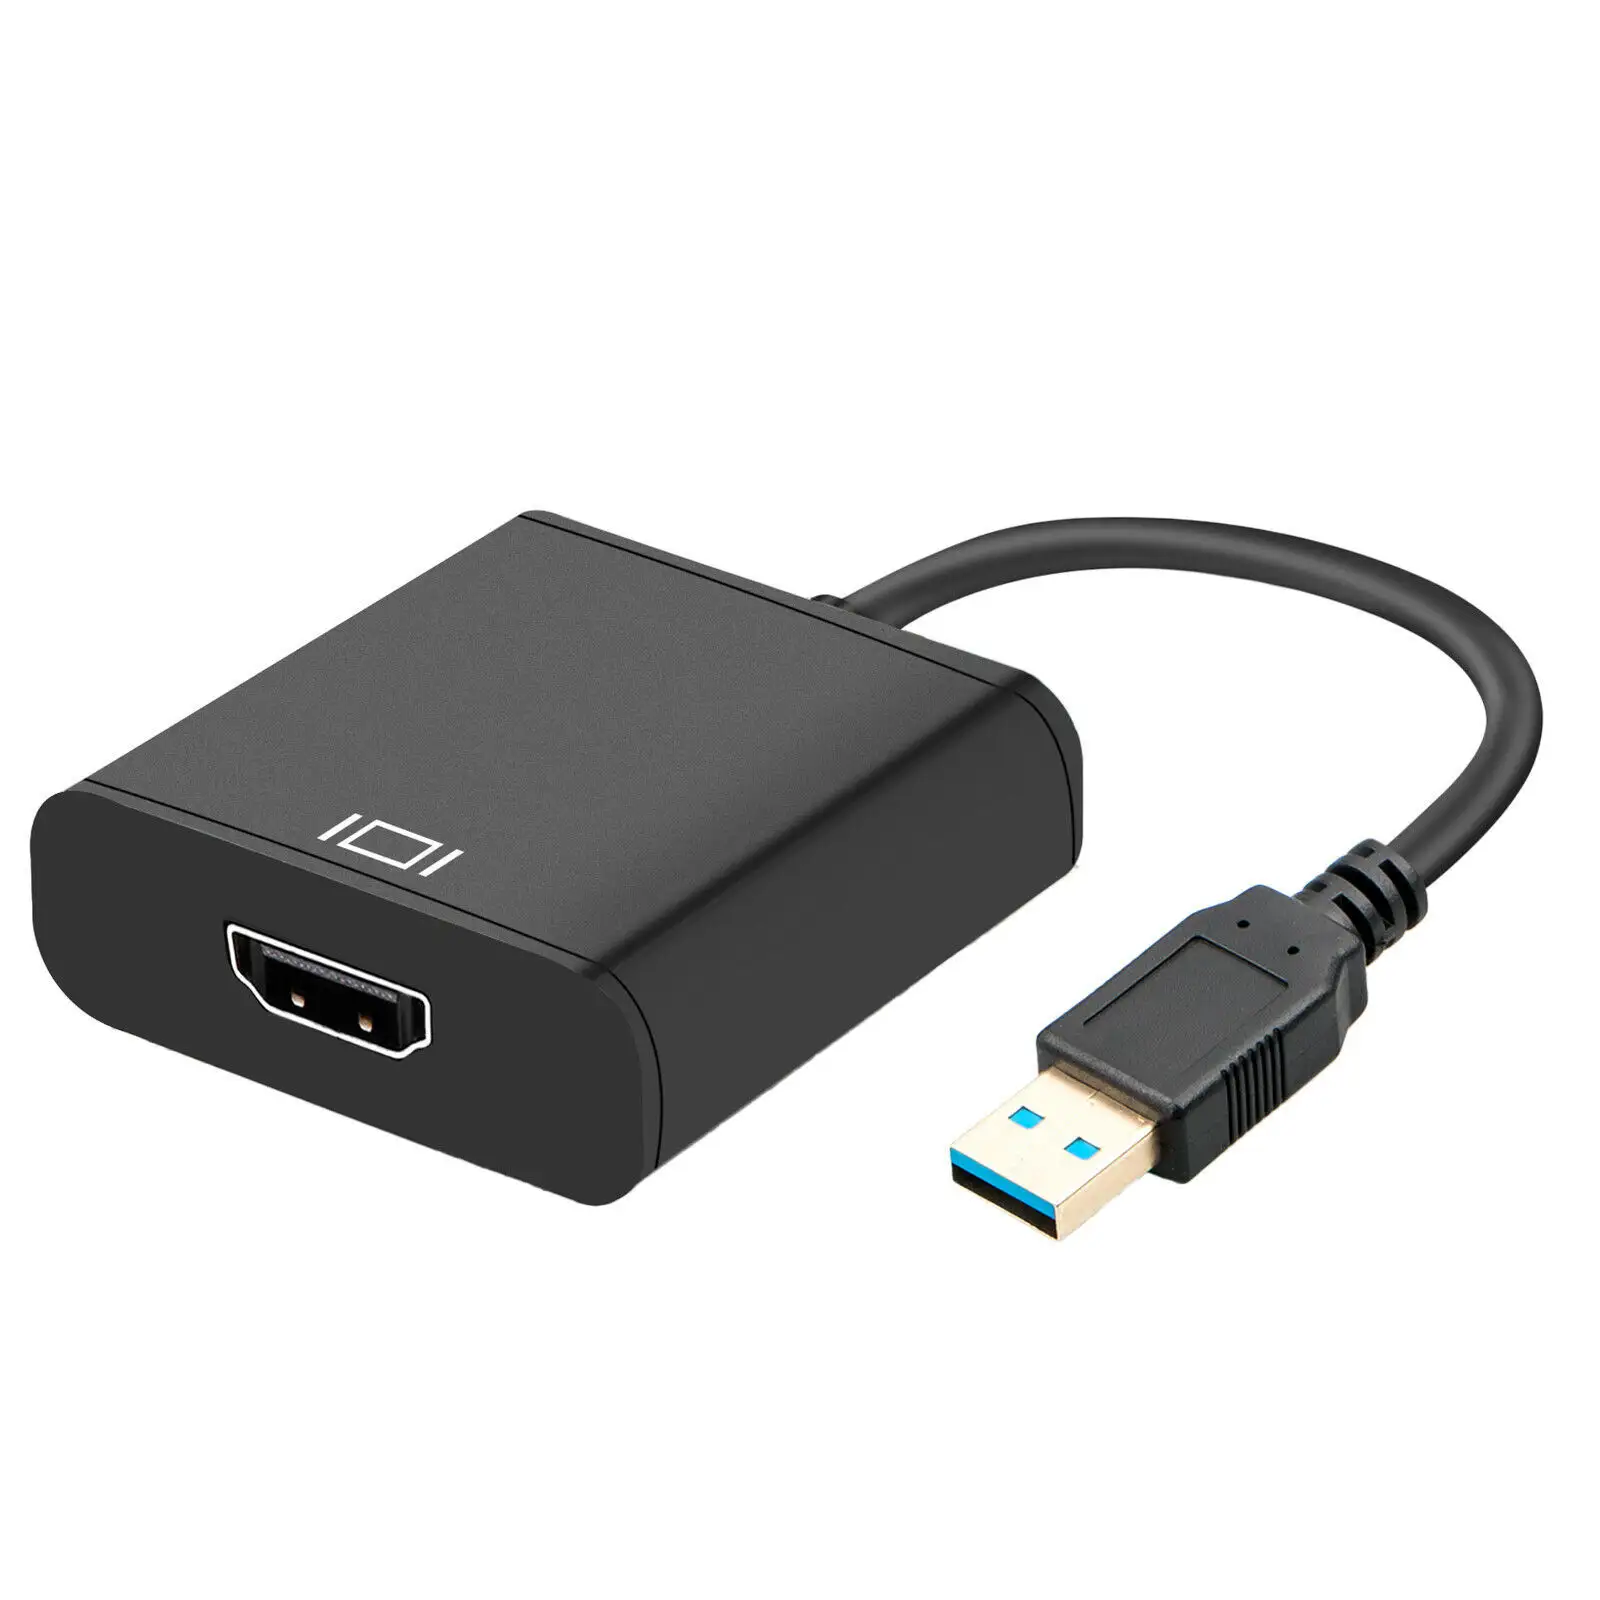 Factory direct USB 3.0 TO HDMI converter USB3.0 to HDMI conversion cable USB adapter explosion 11 in 1 usb